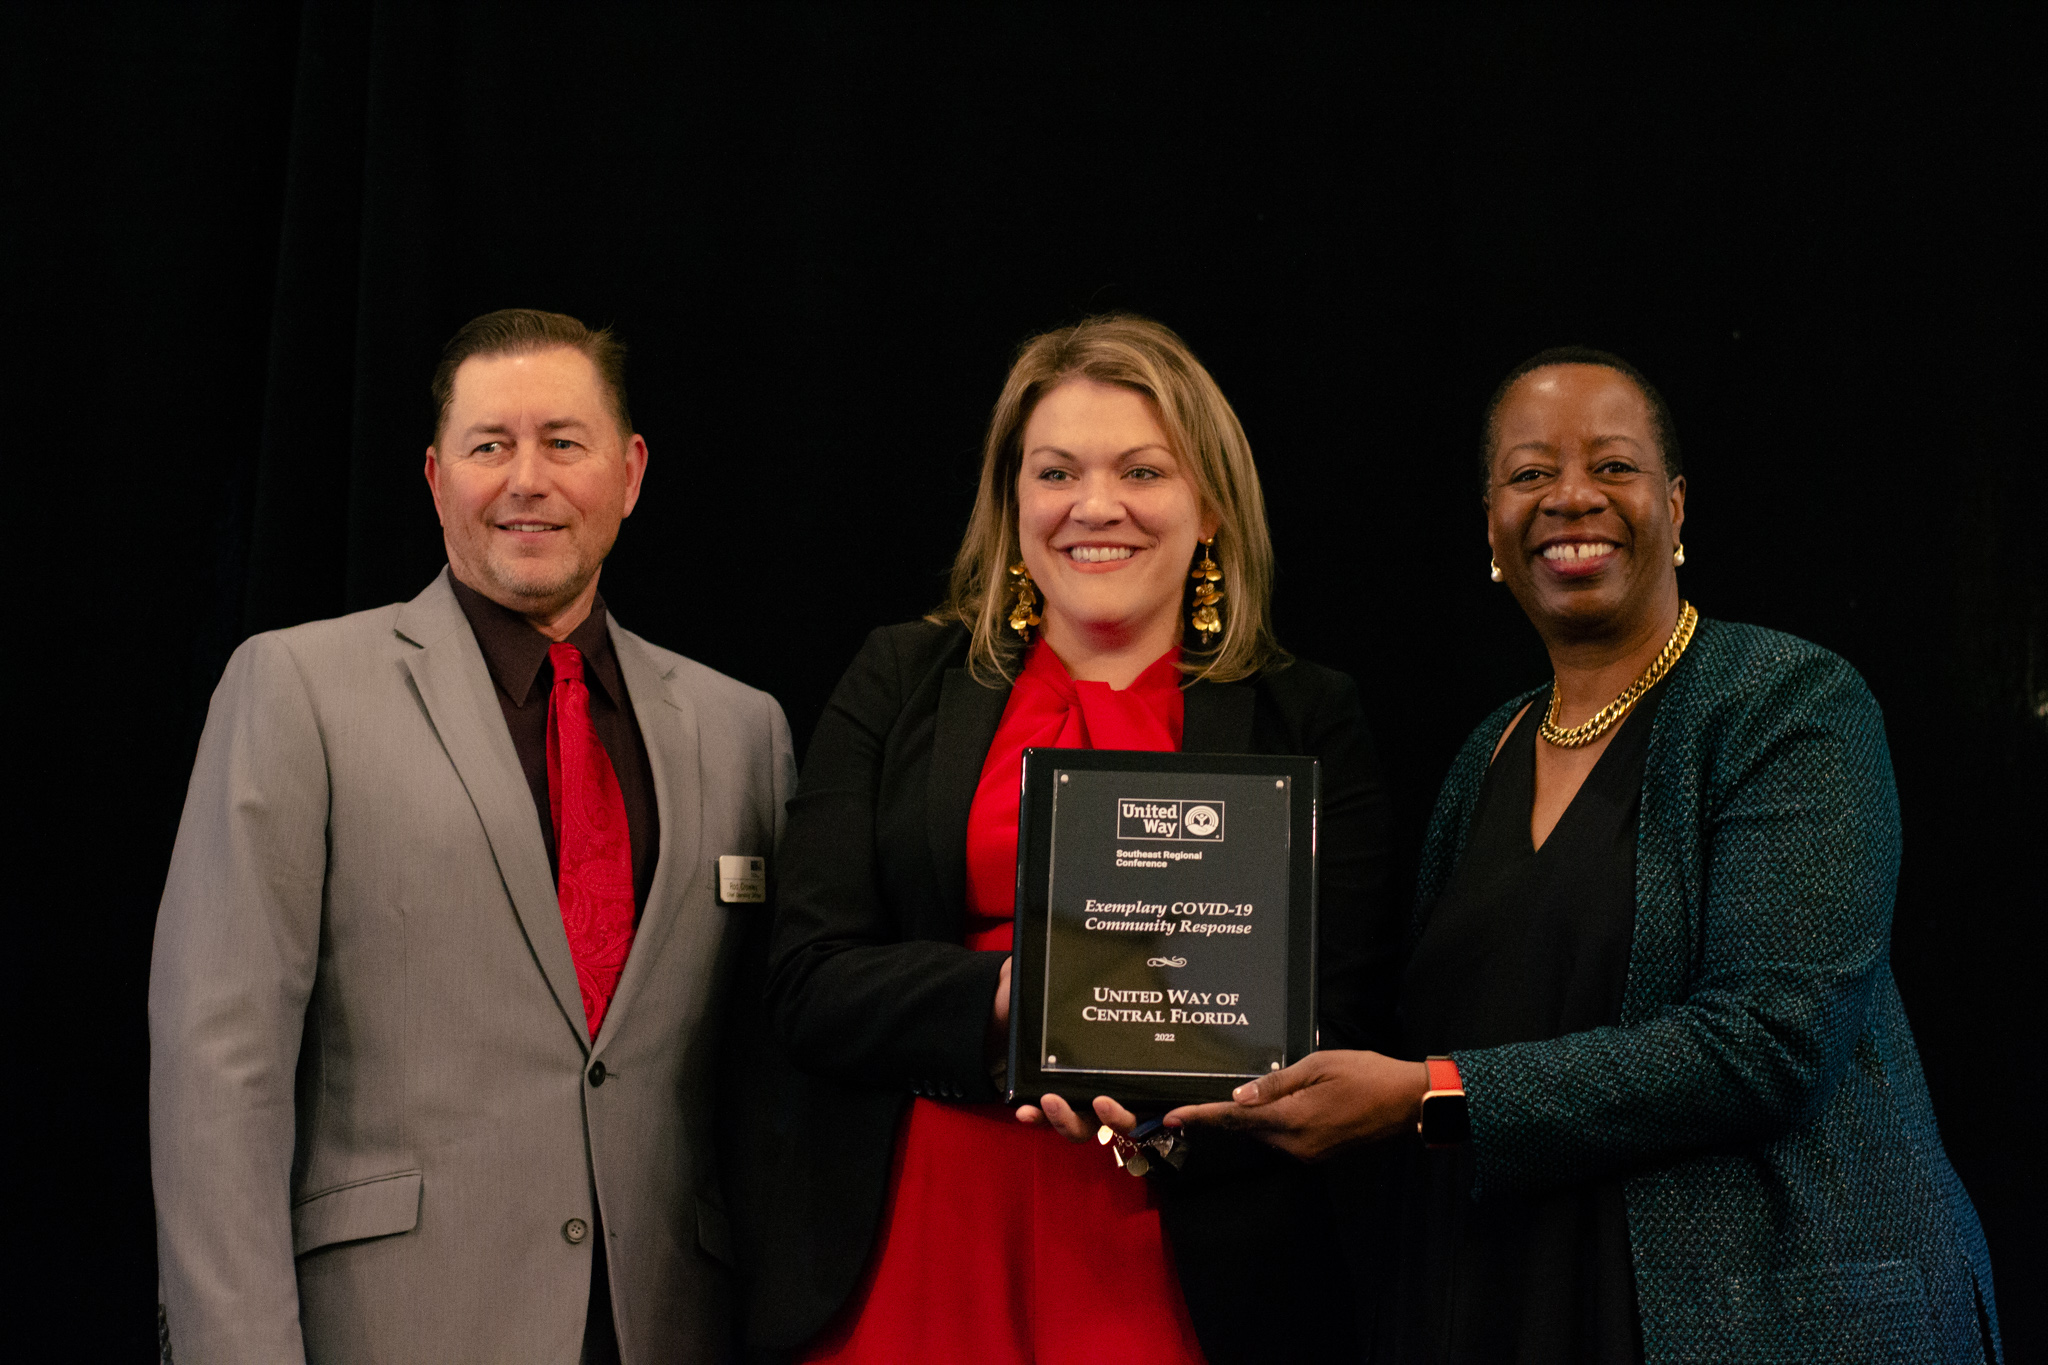 2022 SERC Awards - Angela Williams, UWW Pres. & CEO, presenting United Way of Central Florida, represented by Christina Criser Jackson (CEO) and Rod Crowley (COO), with the "Exemplary COVID-19 Community Response" award (April 2022)